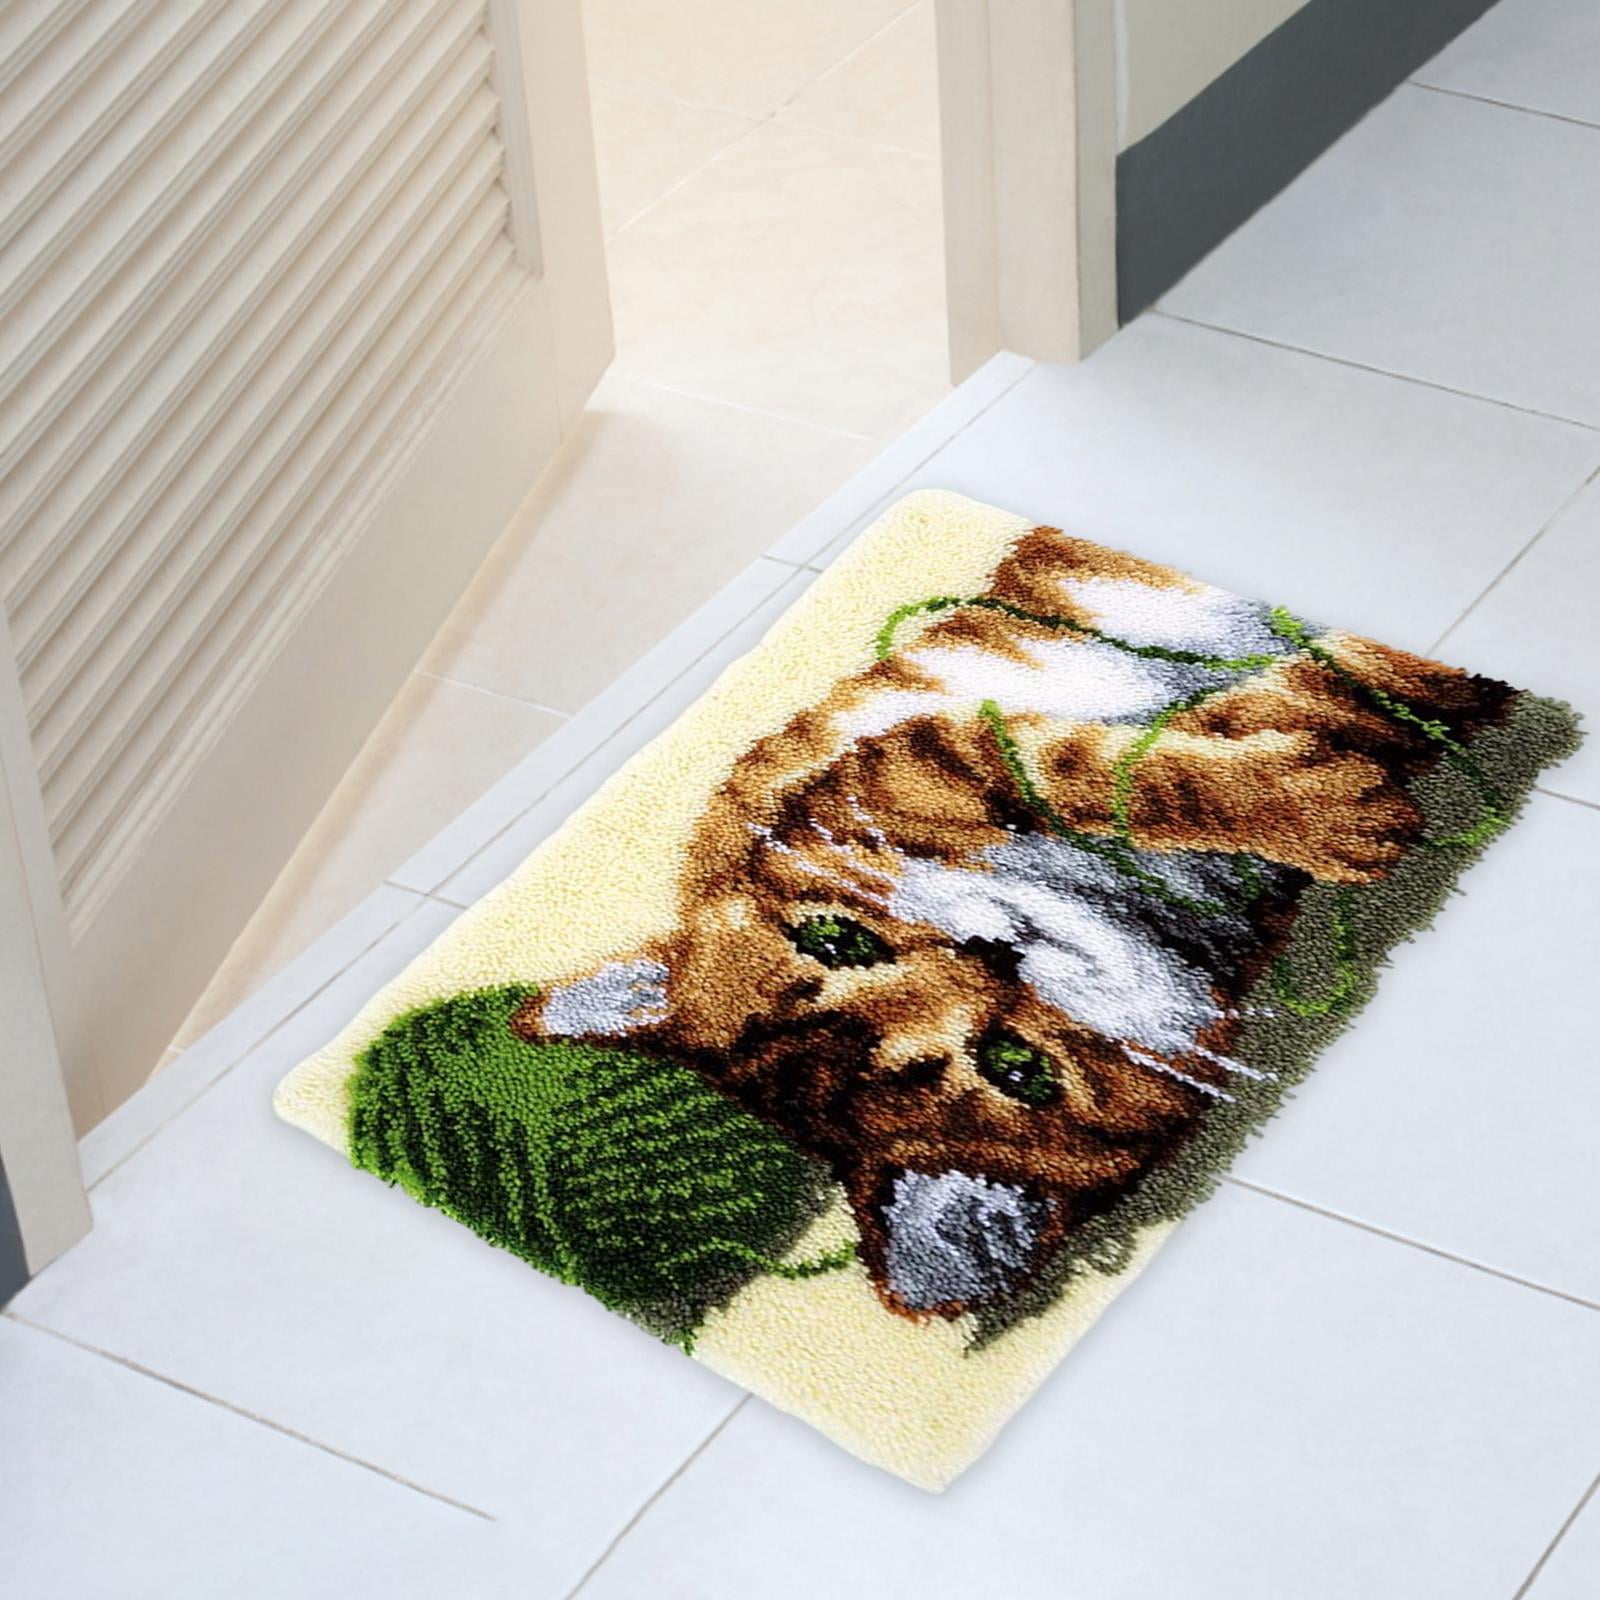 Abbraccia Latch Hook Rug Kits, DIY Cats Rug Making Kits for Adults Kids,Cat Pattern Needlework Embroidery Kits for Beginners Home Decor,60x40cm, Size